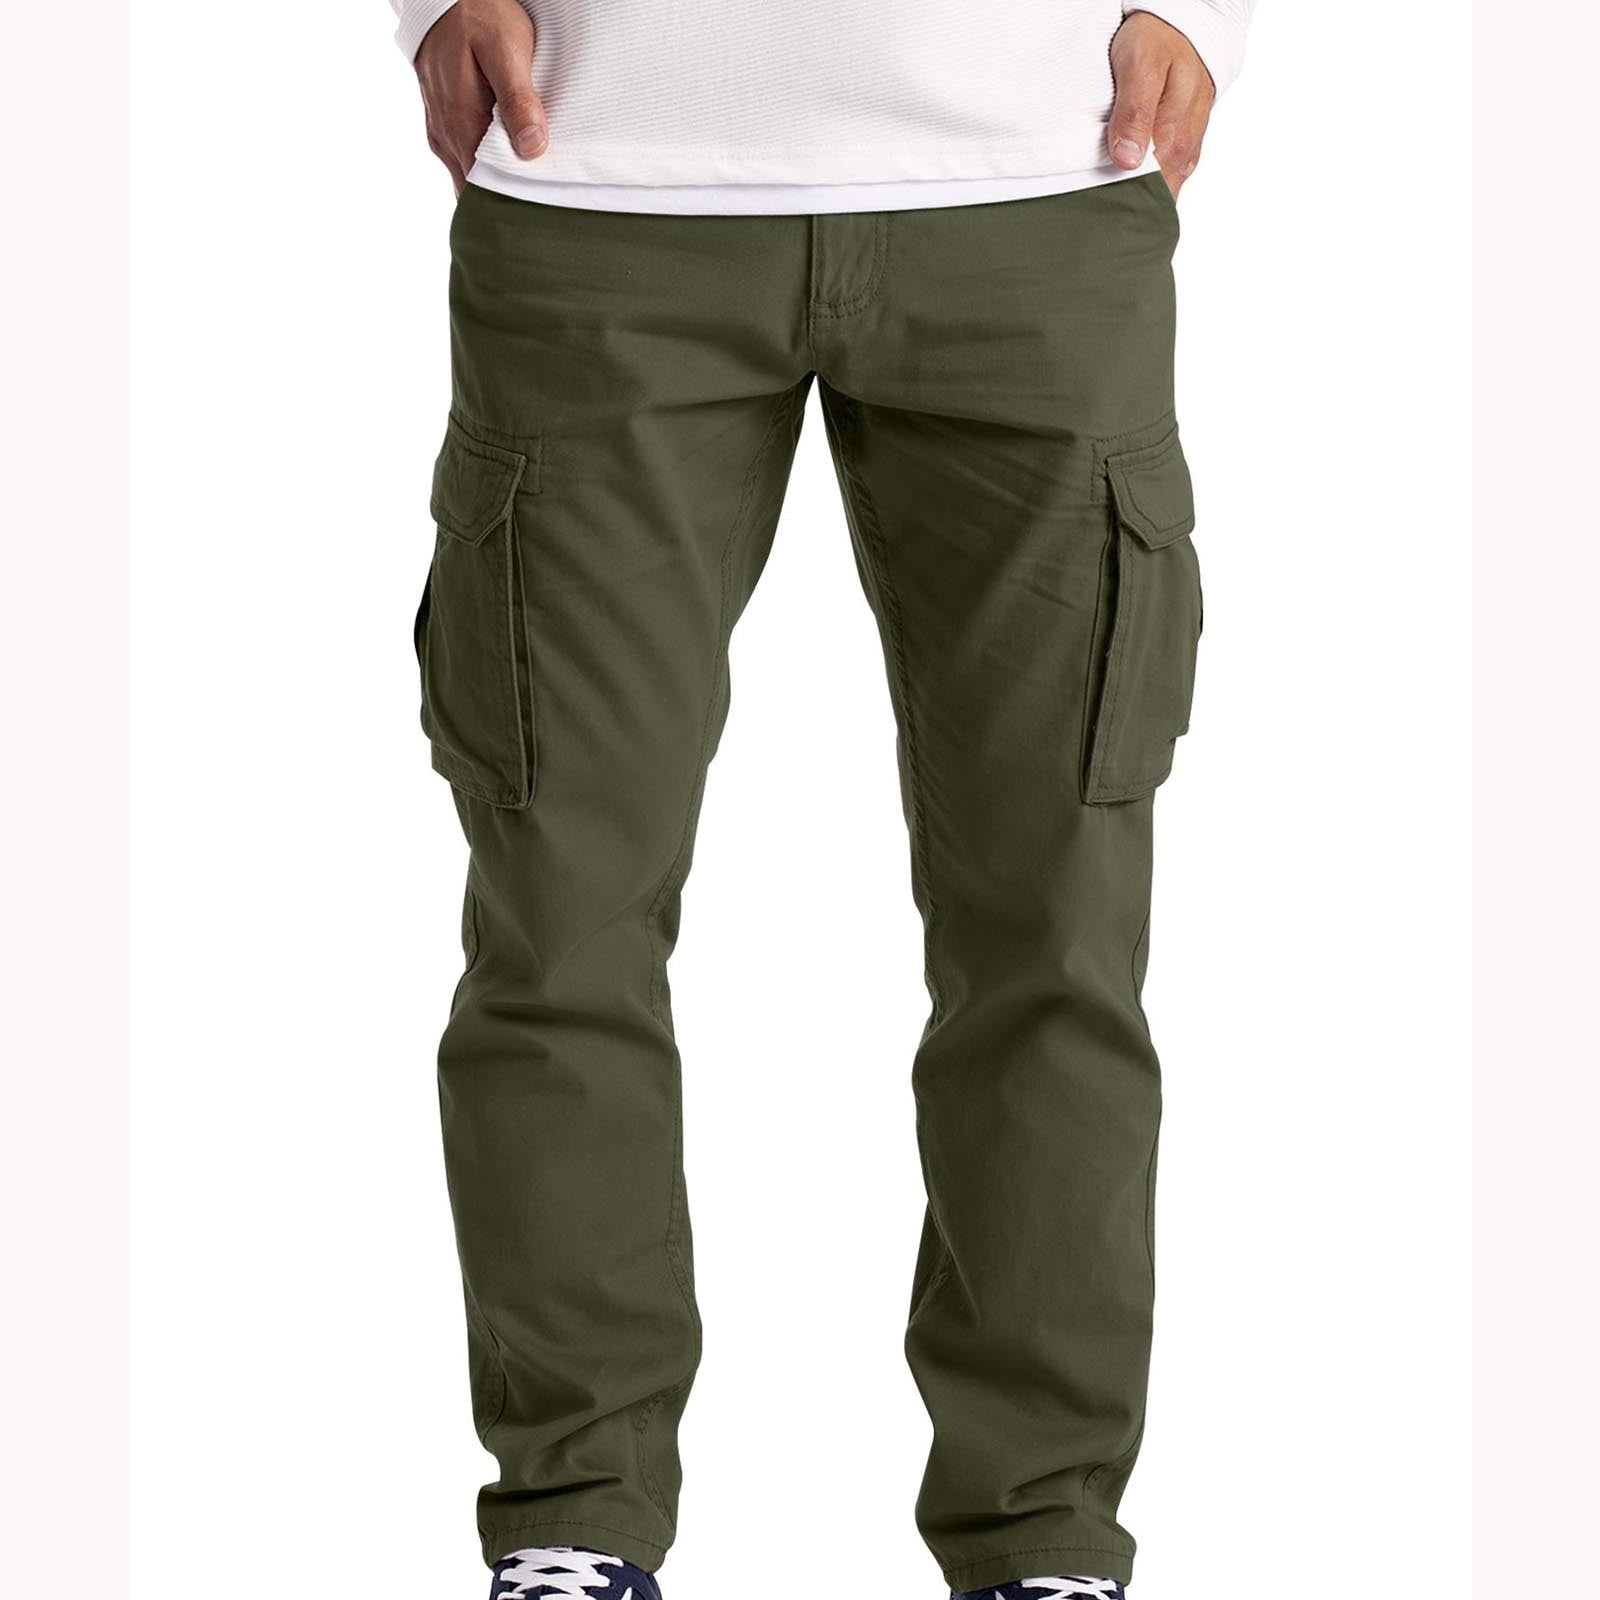 2023 New Year Reset,AXXD Cargo Trousers Work Wear Cargo 6 Pocket Full Pants  Clearance Mens Beach Pants Army Green 4XL